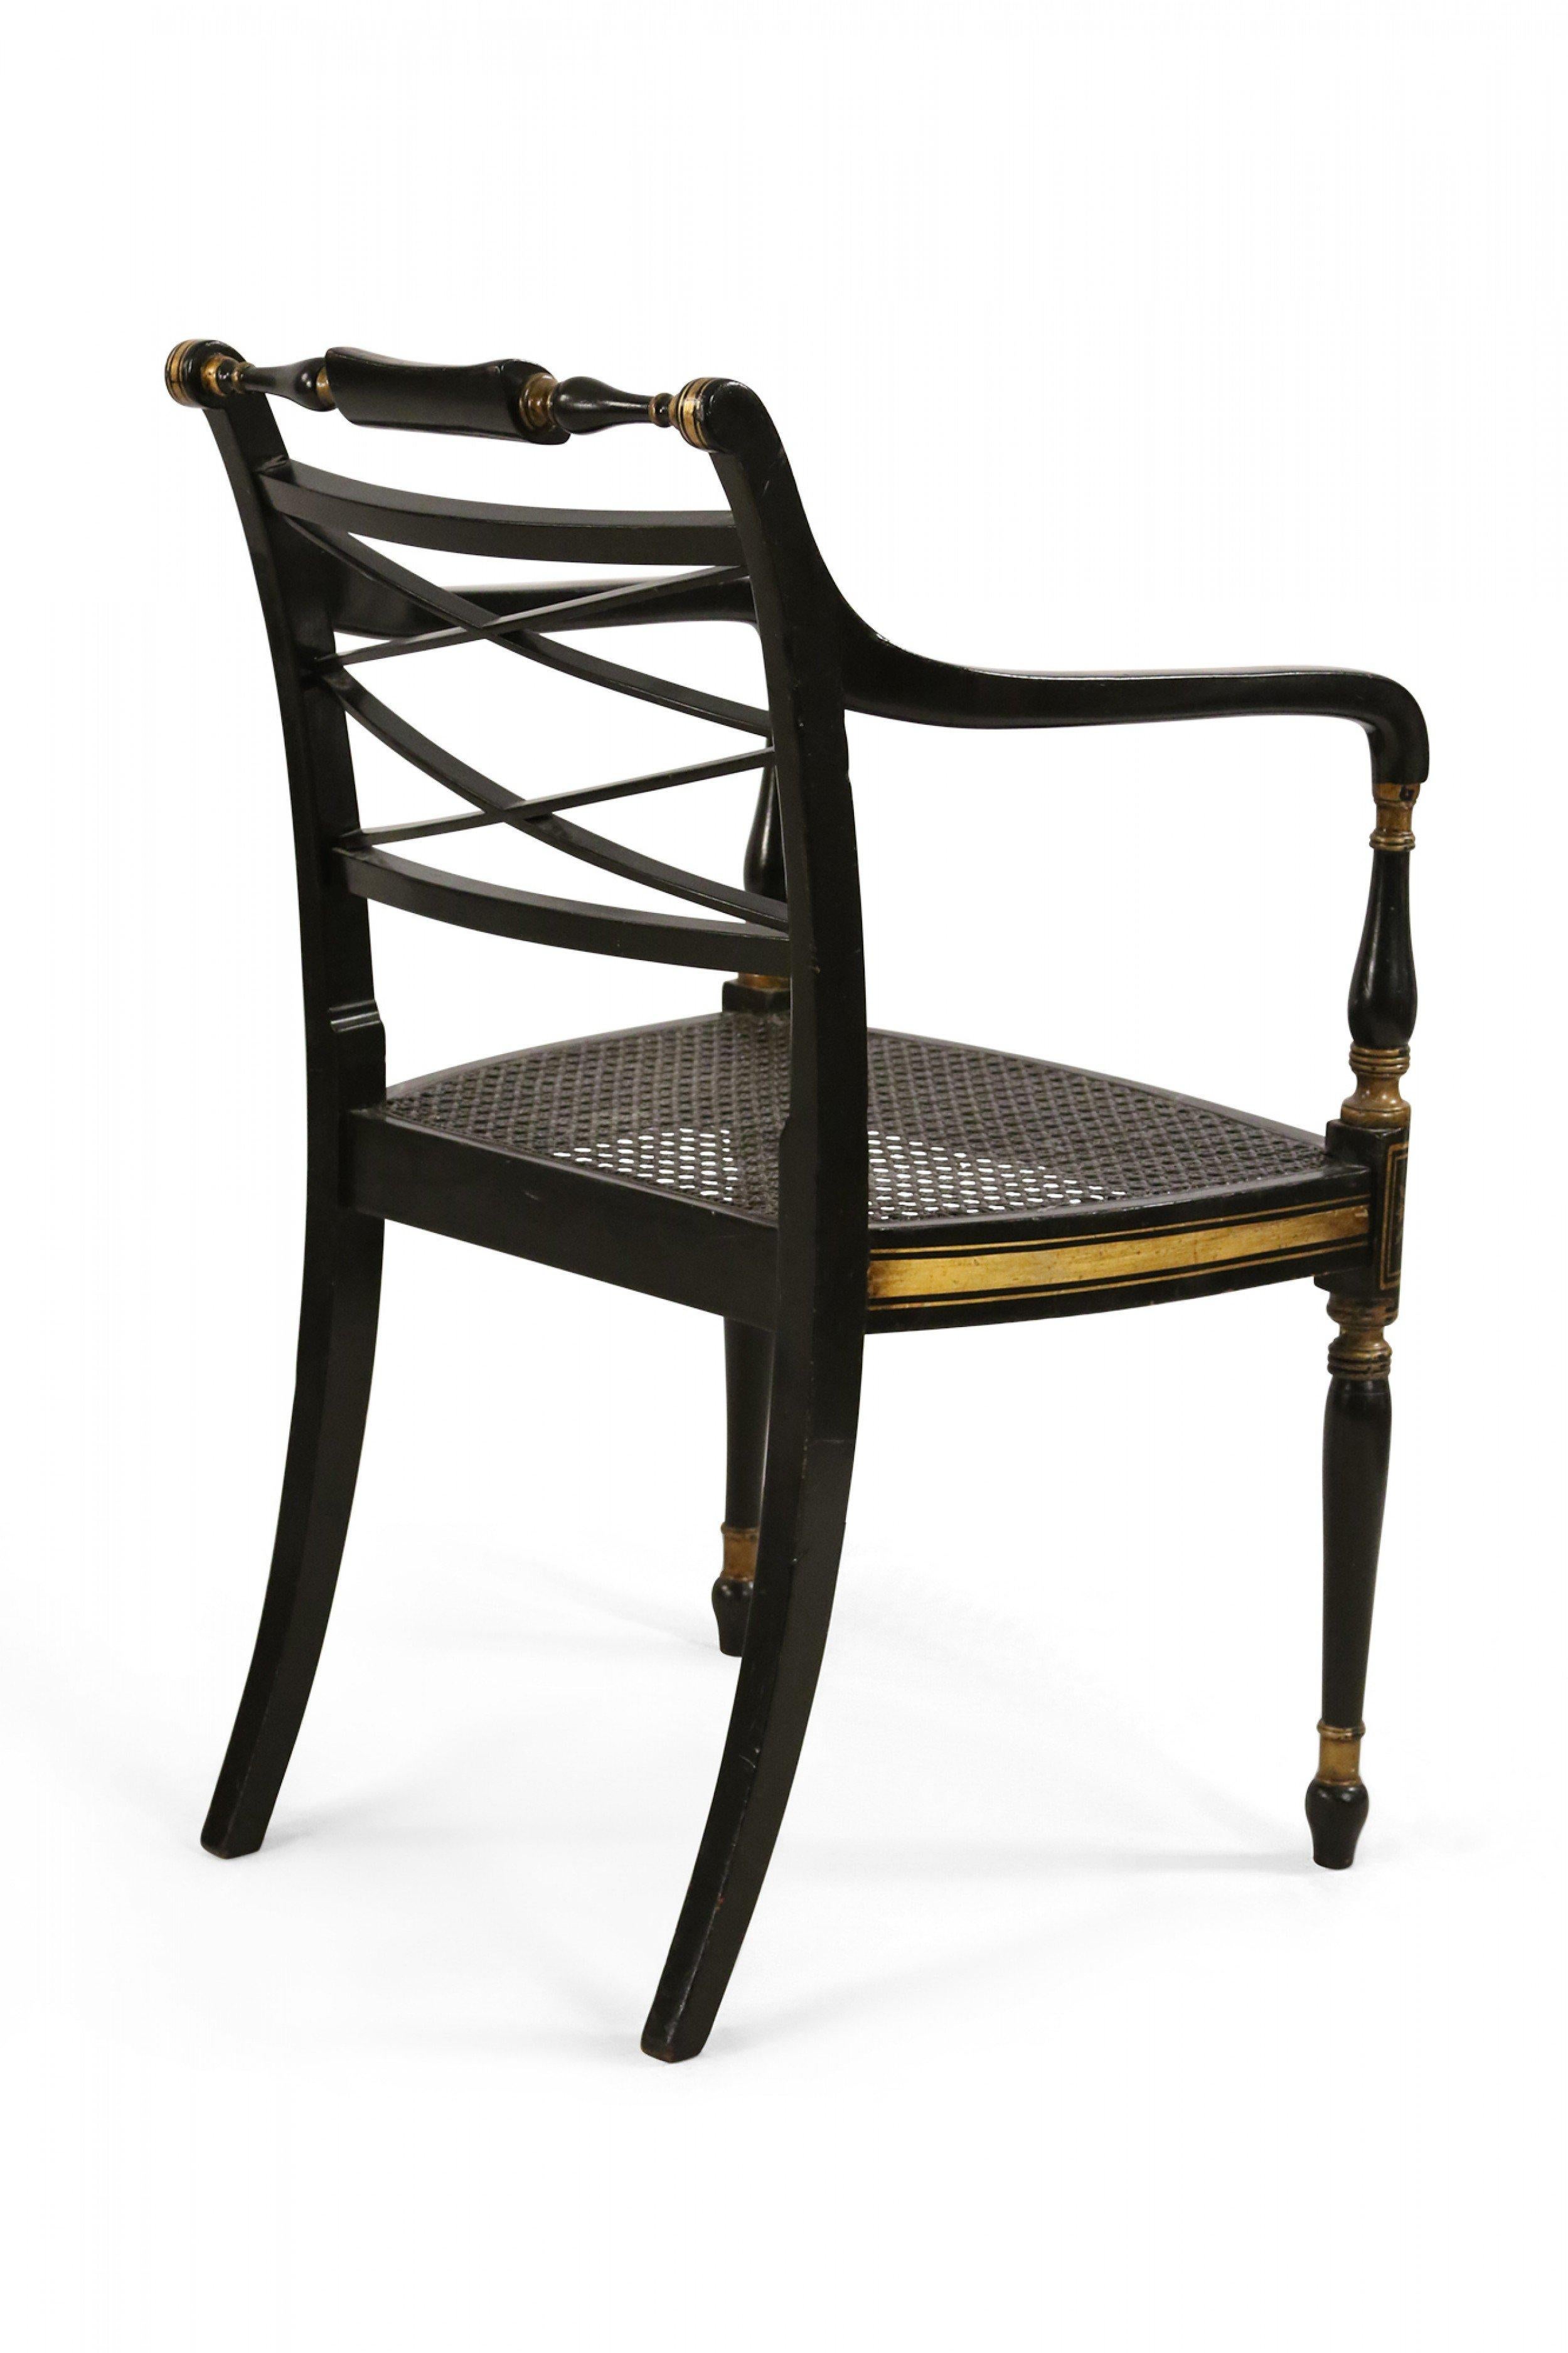 English Regency Style Black and Gold Painted Cane Seat Side Chair For Sale 4